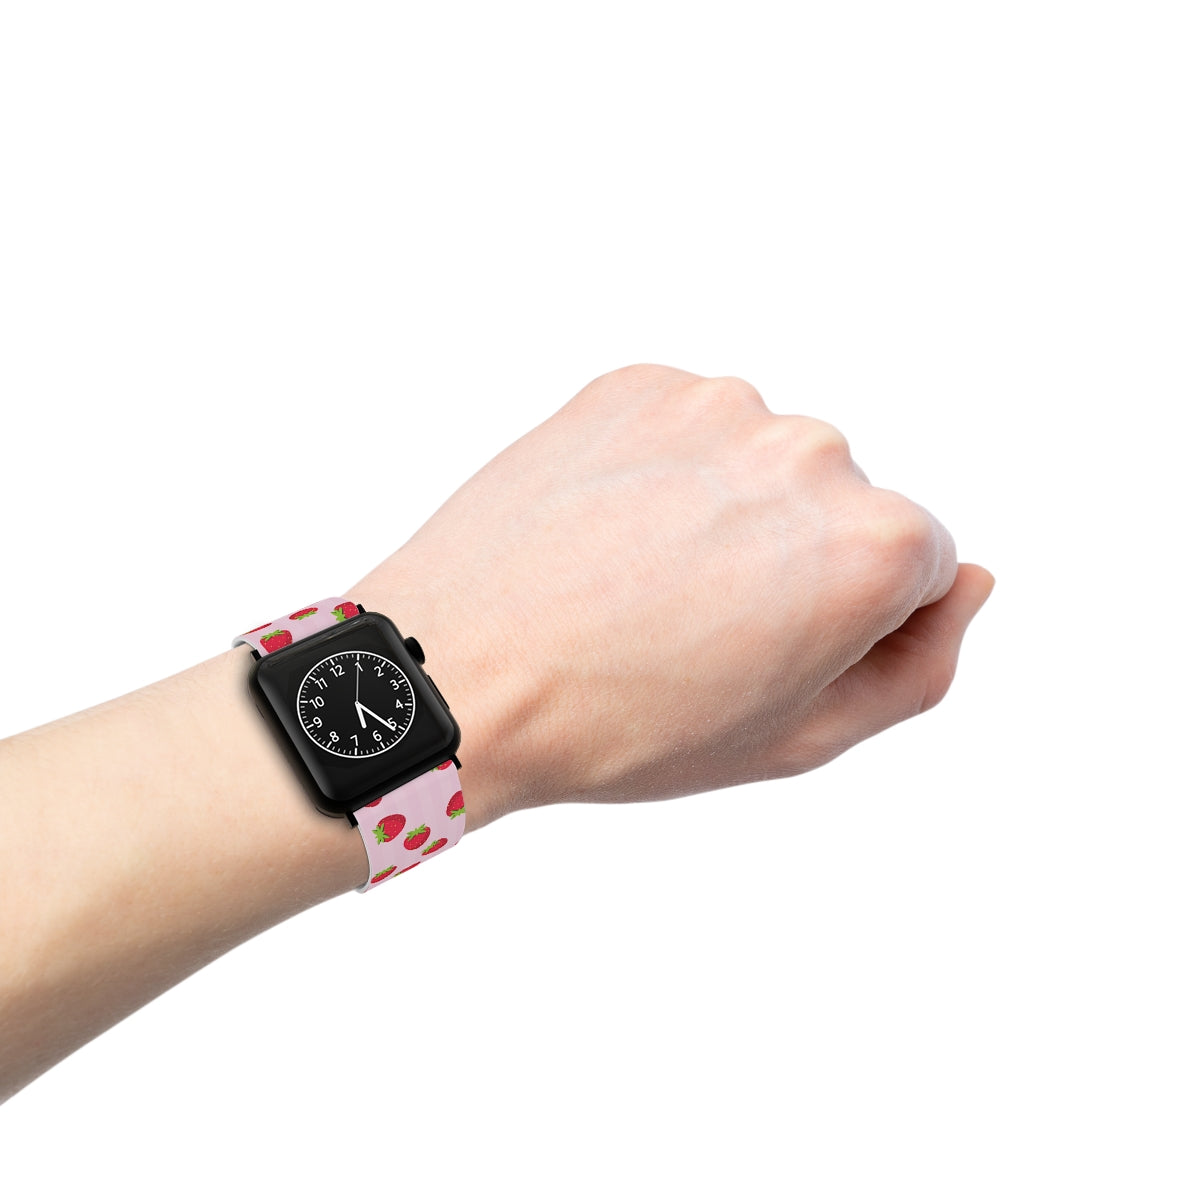 Strawberry Pattern Watch Band for Apple Watch